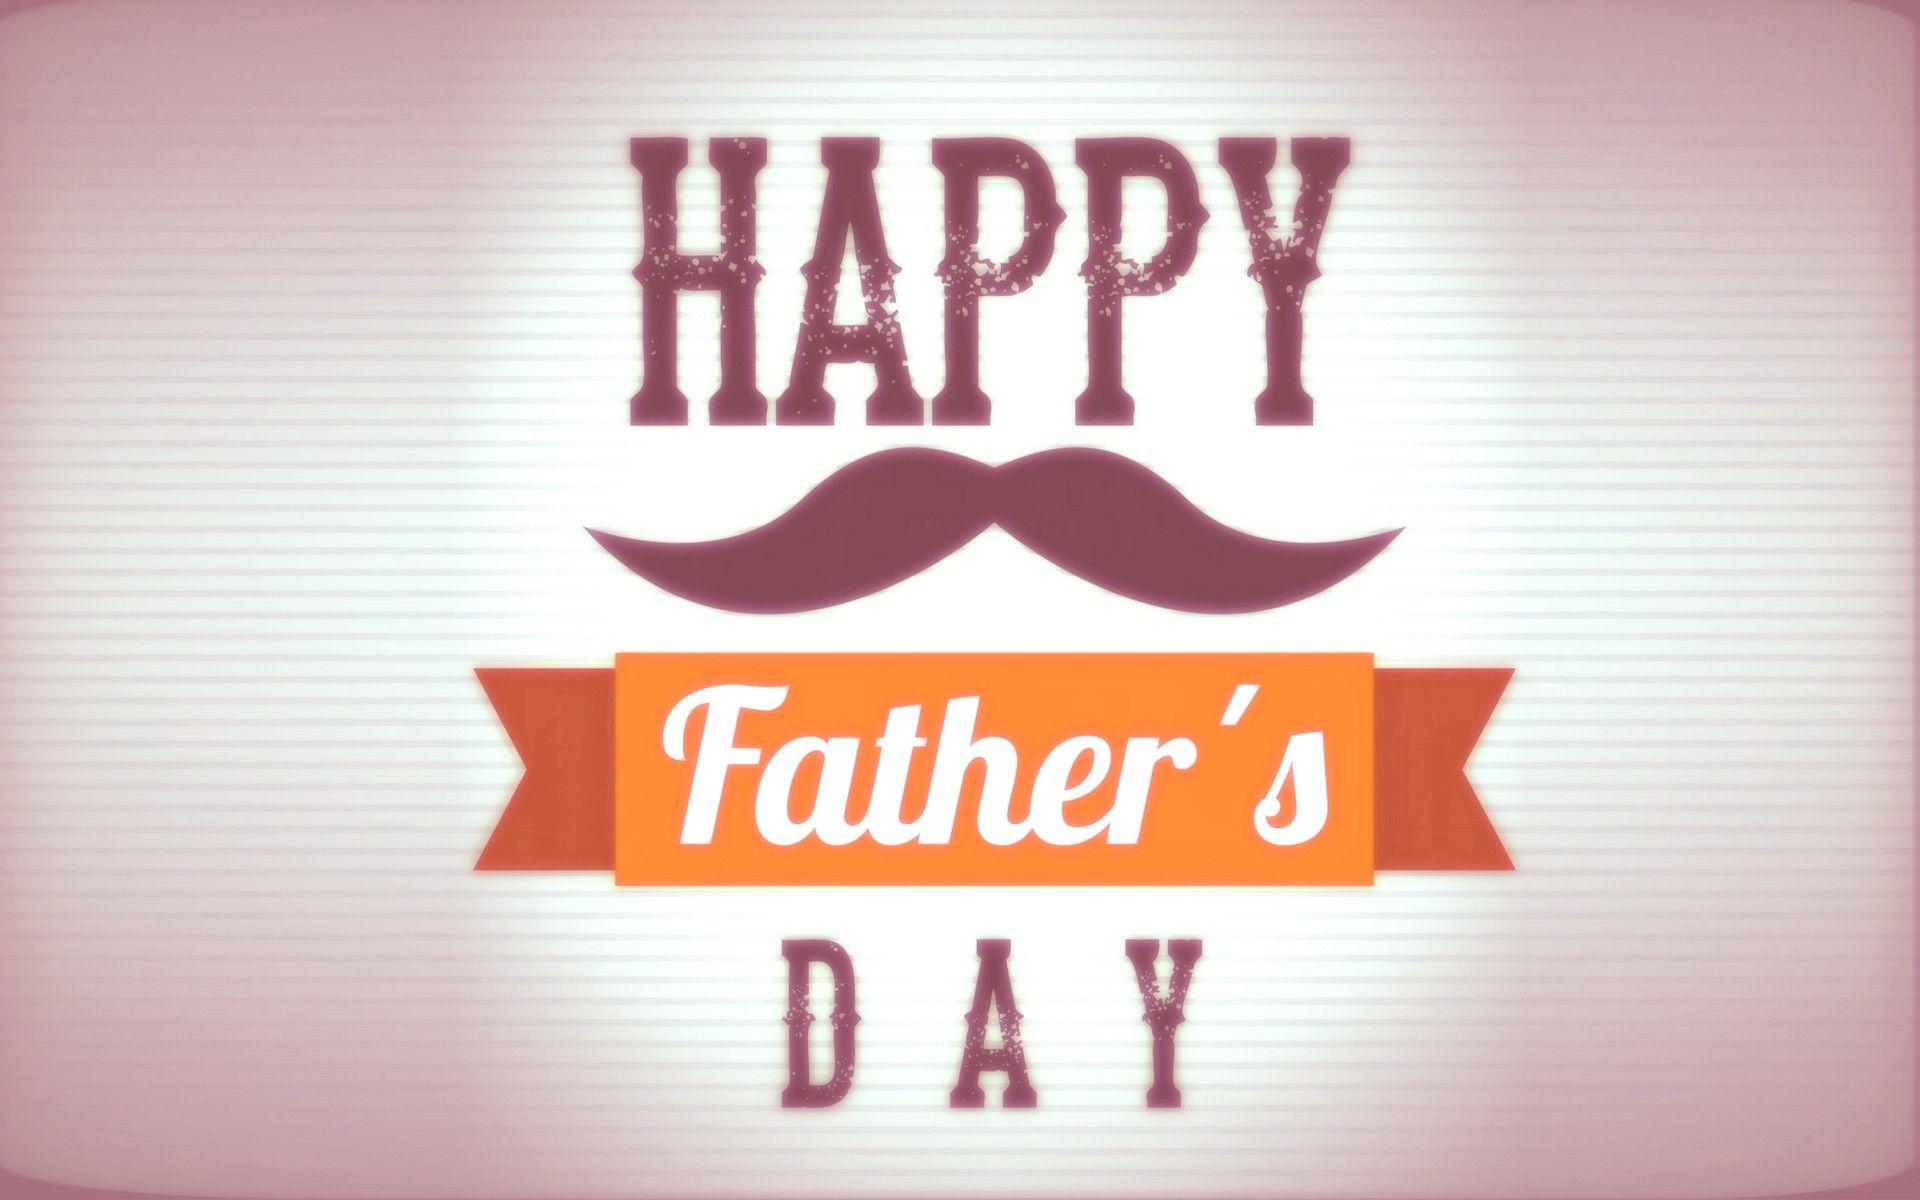 Happy Father's Day 2017 Greetings Wallpaper Whatsapp Status Dp